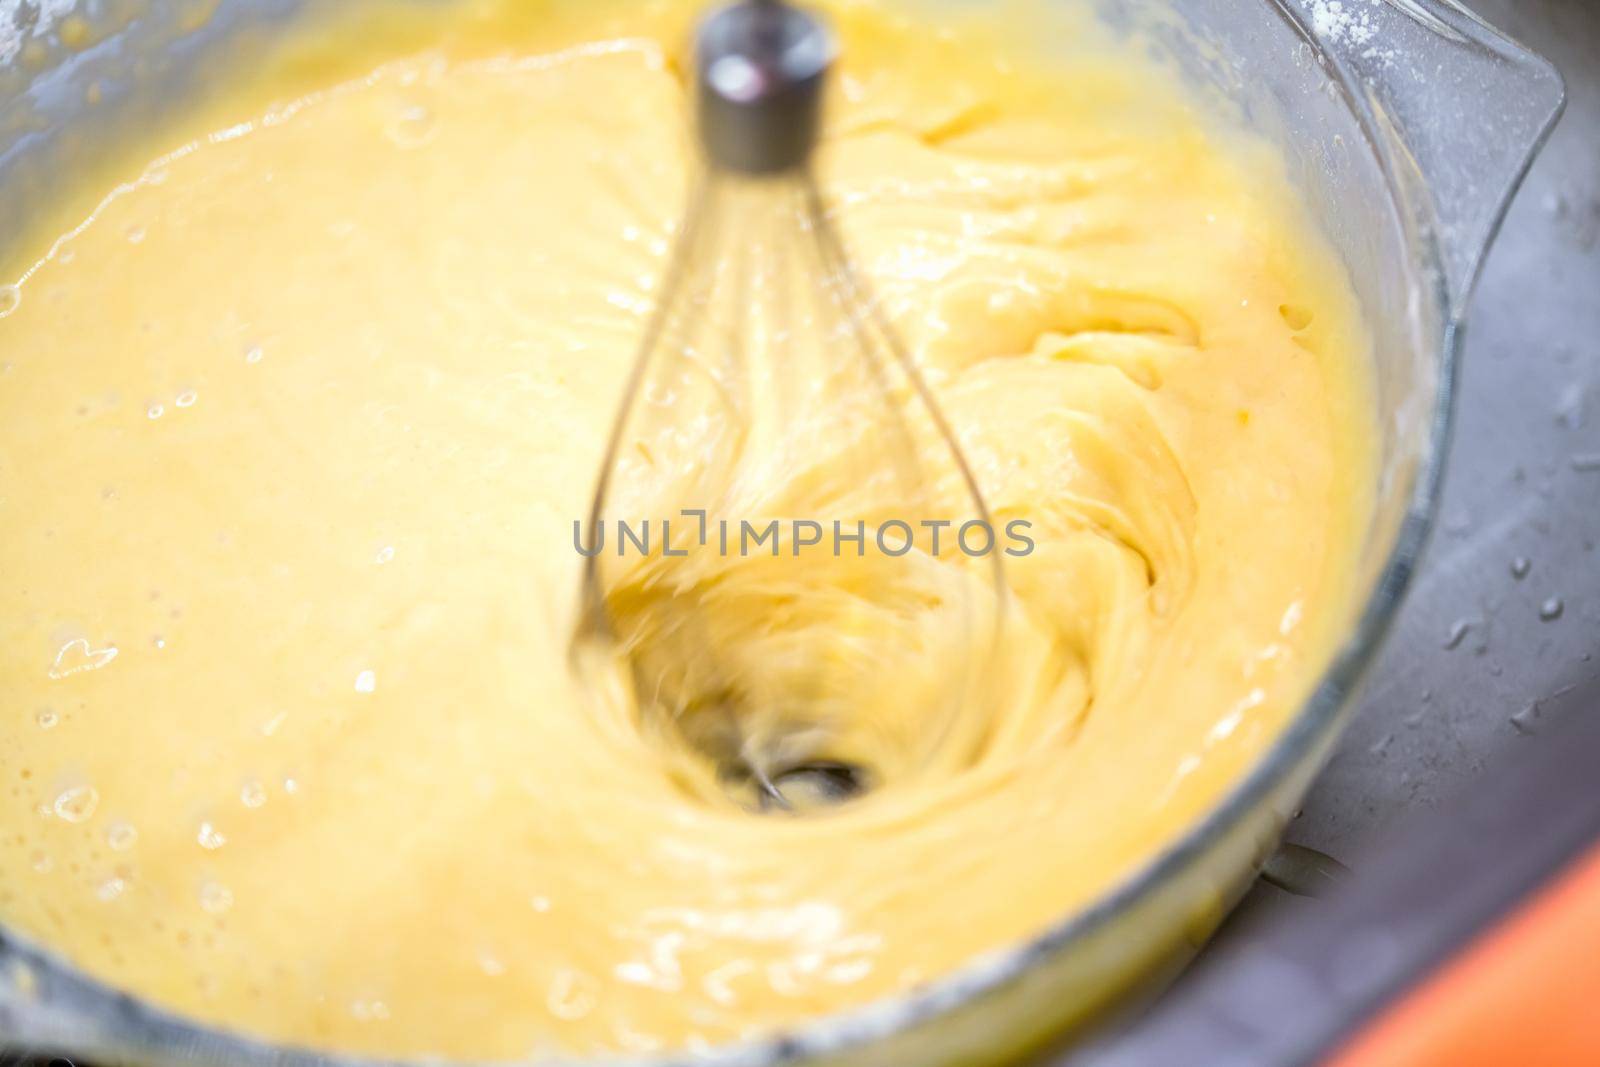 Motion blur photo of mixing homemade delicious cake